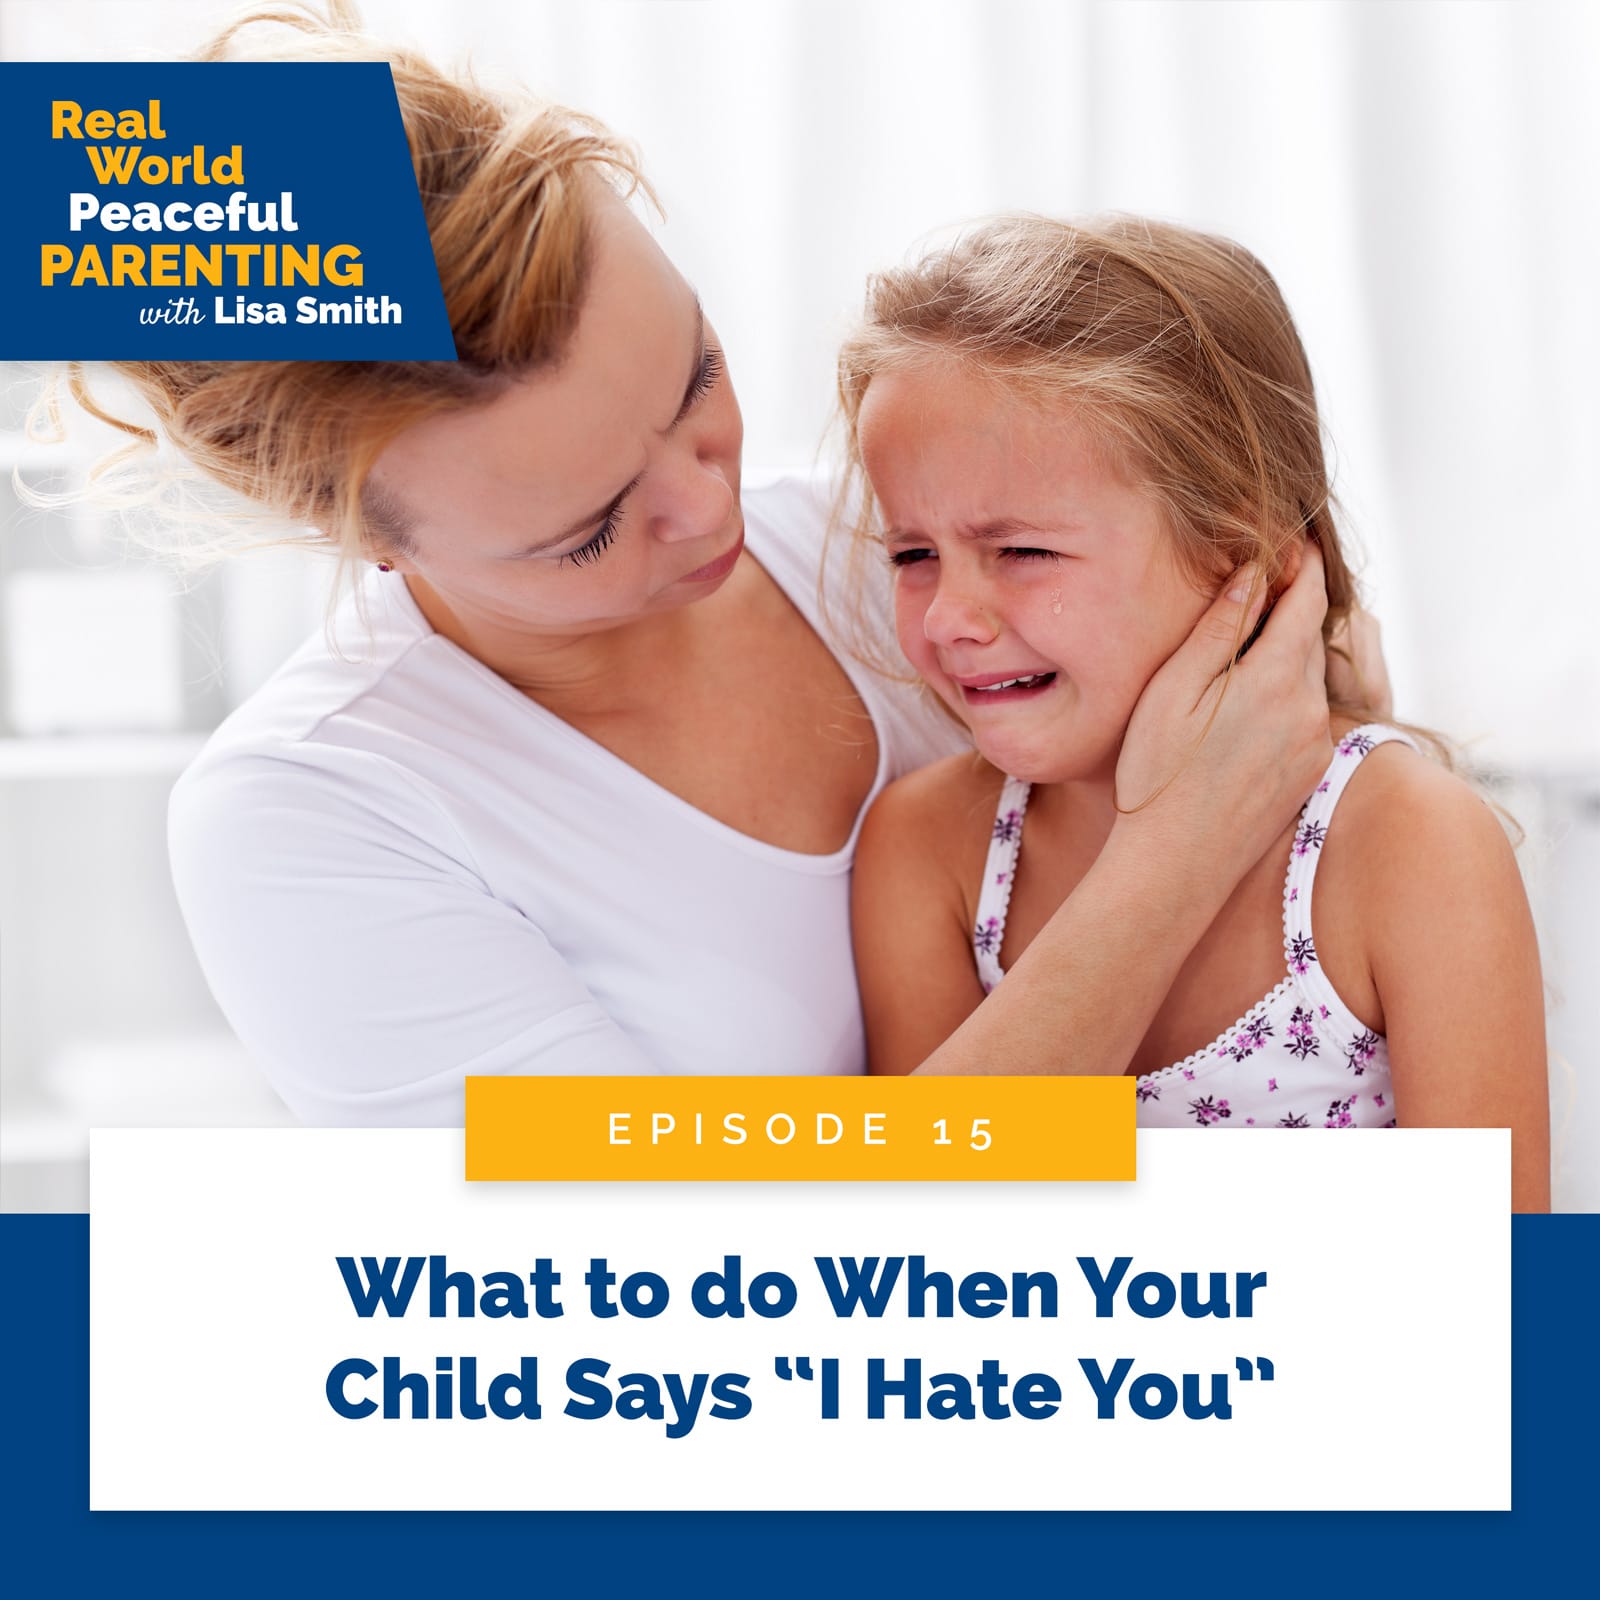 Real World Peaceful Parenting with Lisa Smith | What to do When Your Child Says “I Hate You”